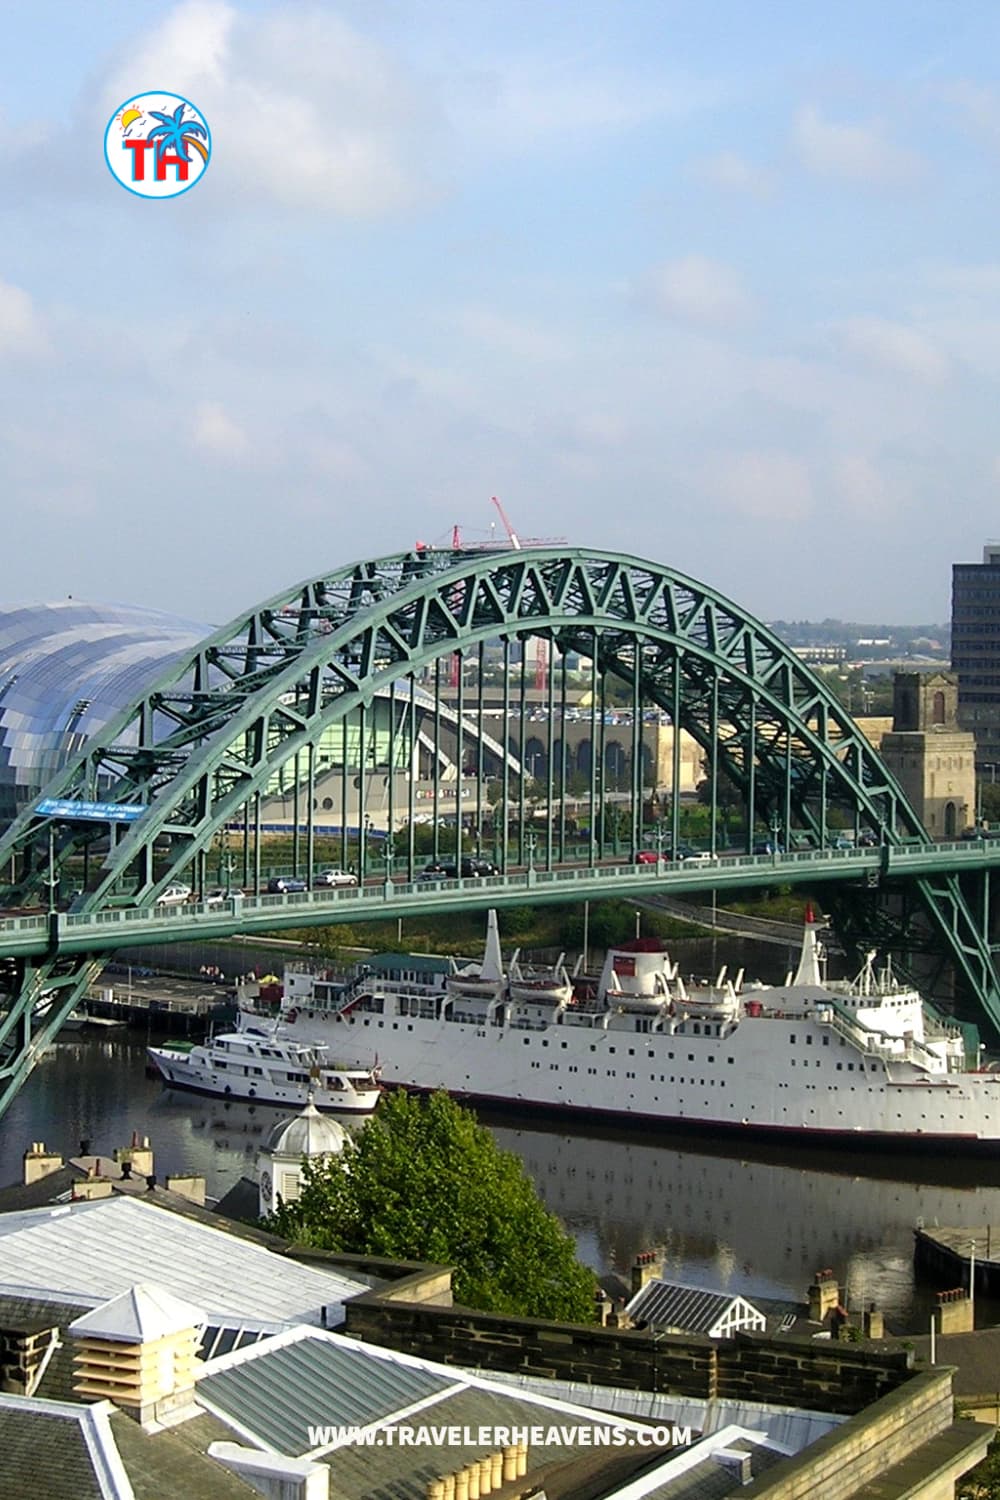 Beautiful Destinations, Best Places to Visit in Newcastle upon Tyne, Travel to Newcastle upon Tyne, UK, UK Best Places, UK Travel Guide, Visit Newcastle upon Tyne